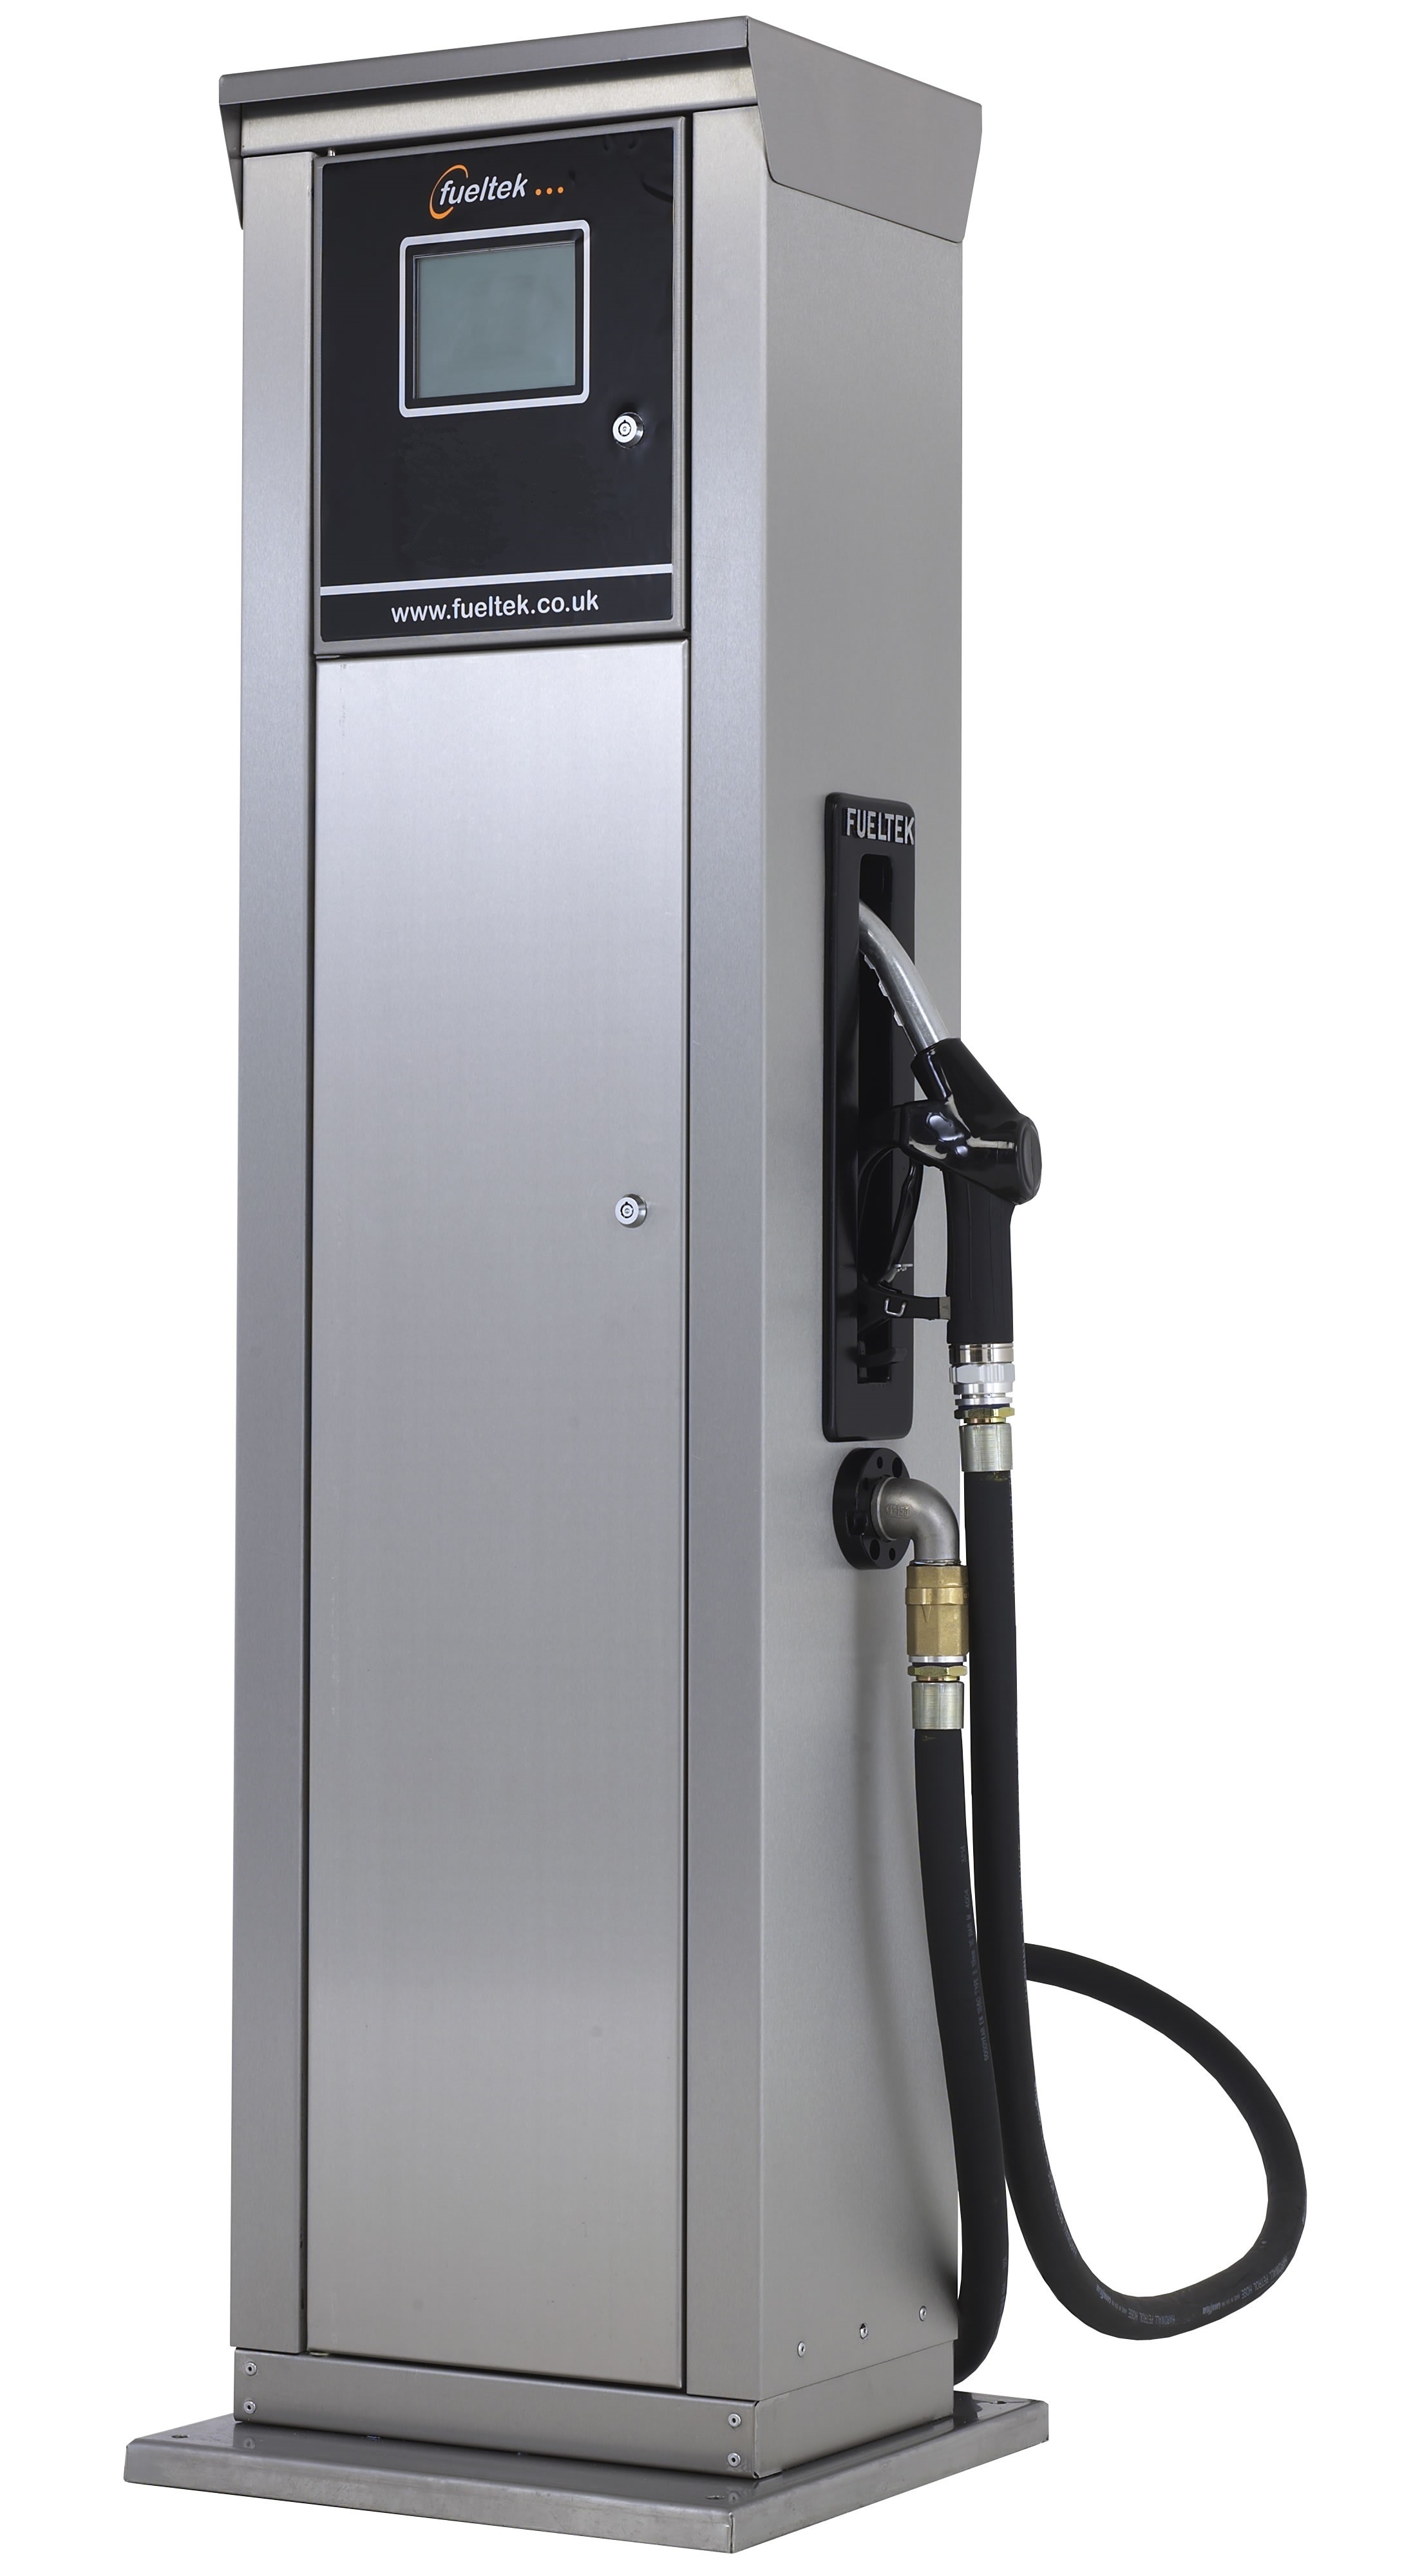 Designers of Commercial Fuel Dispensers